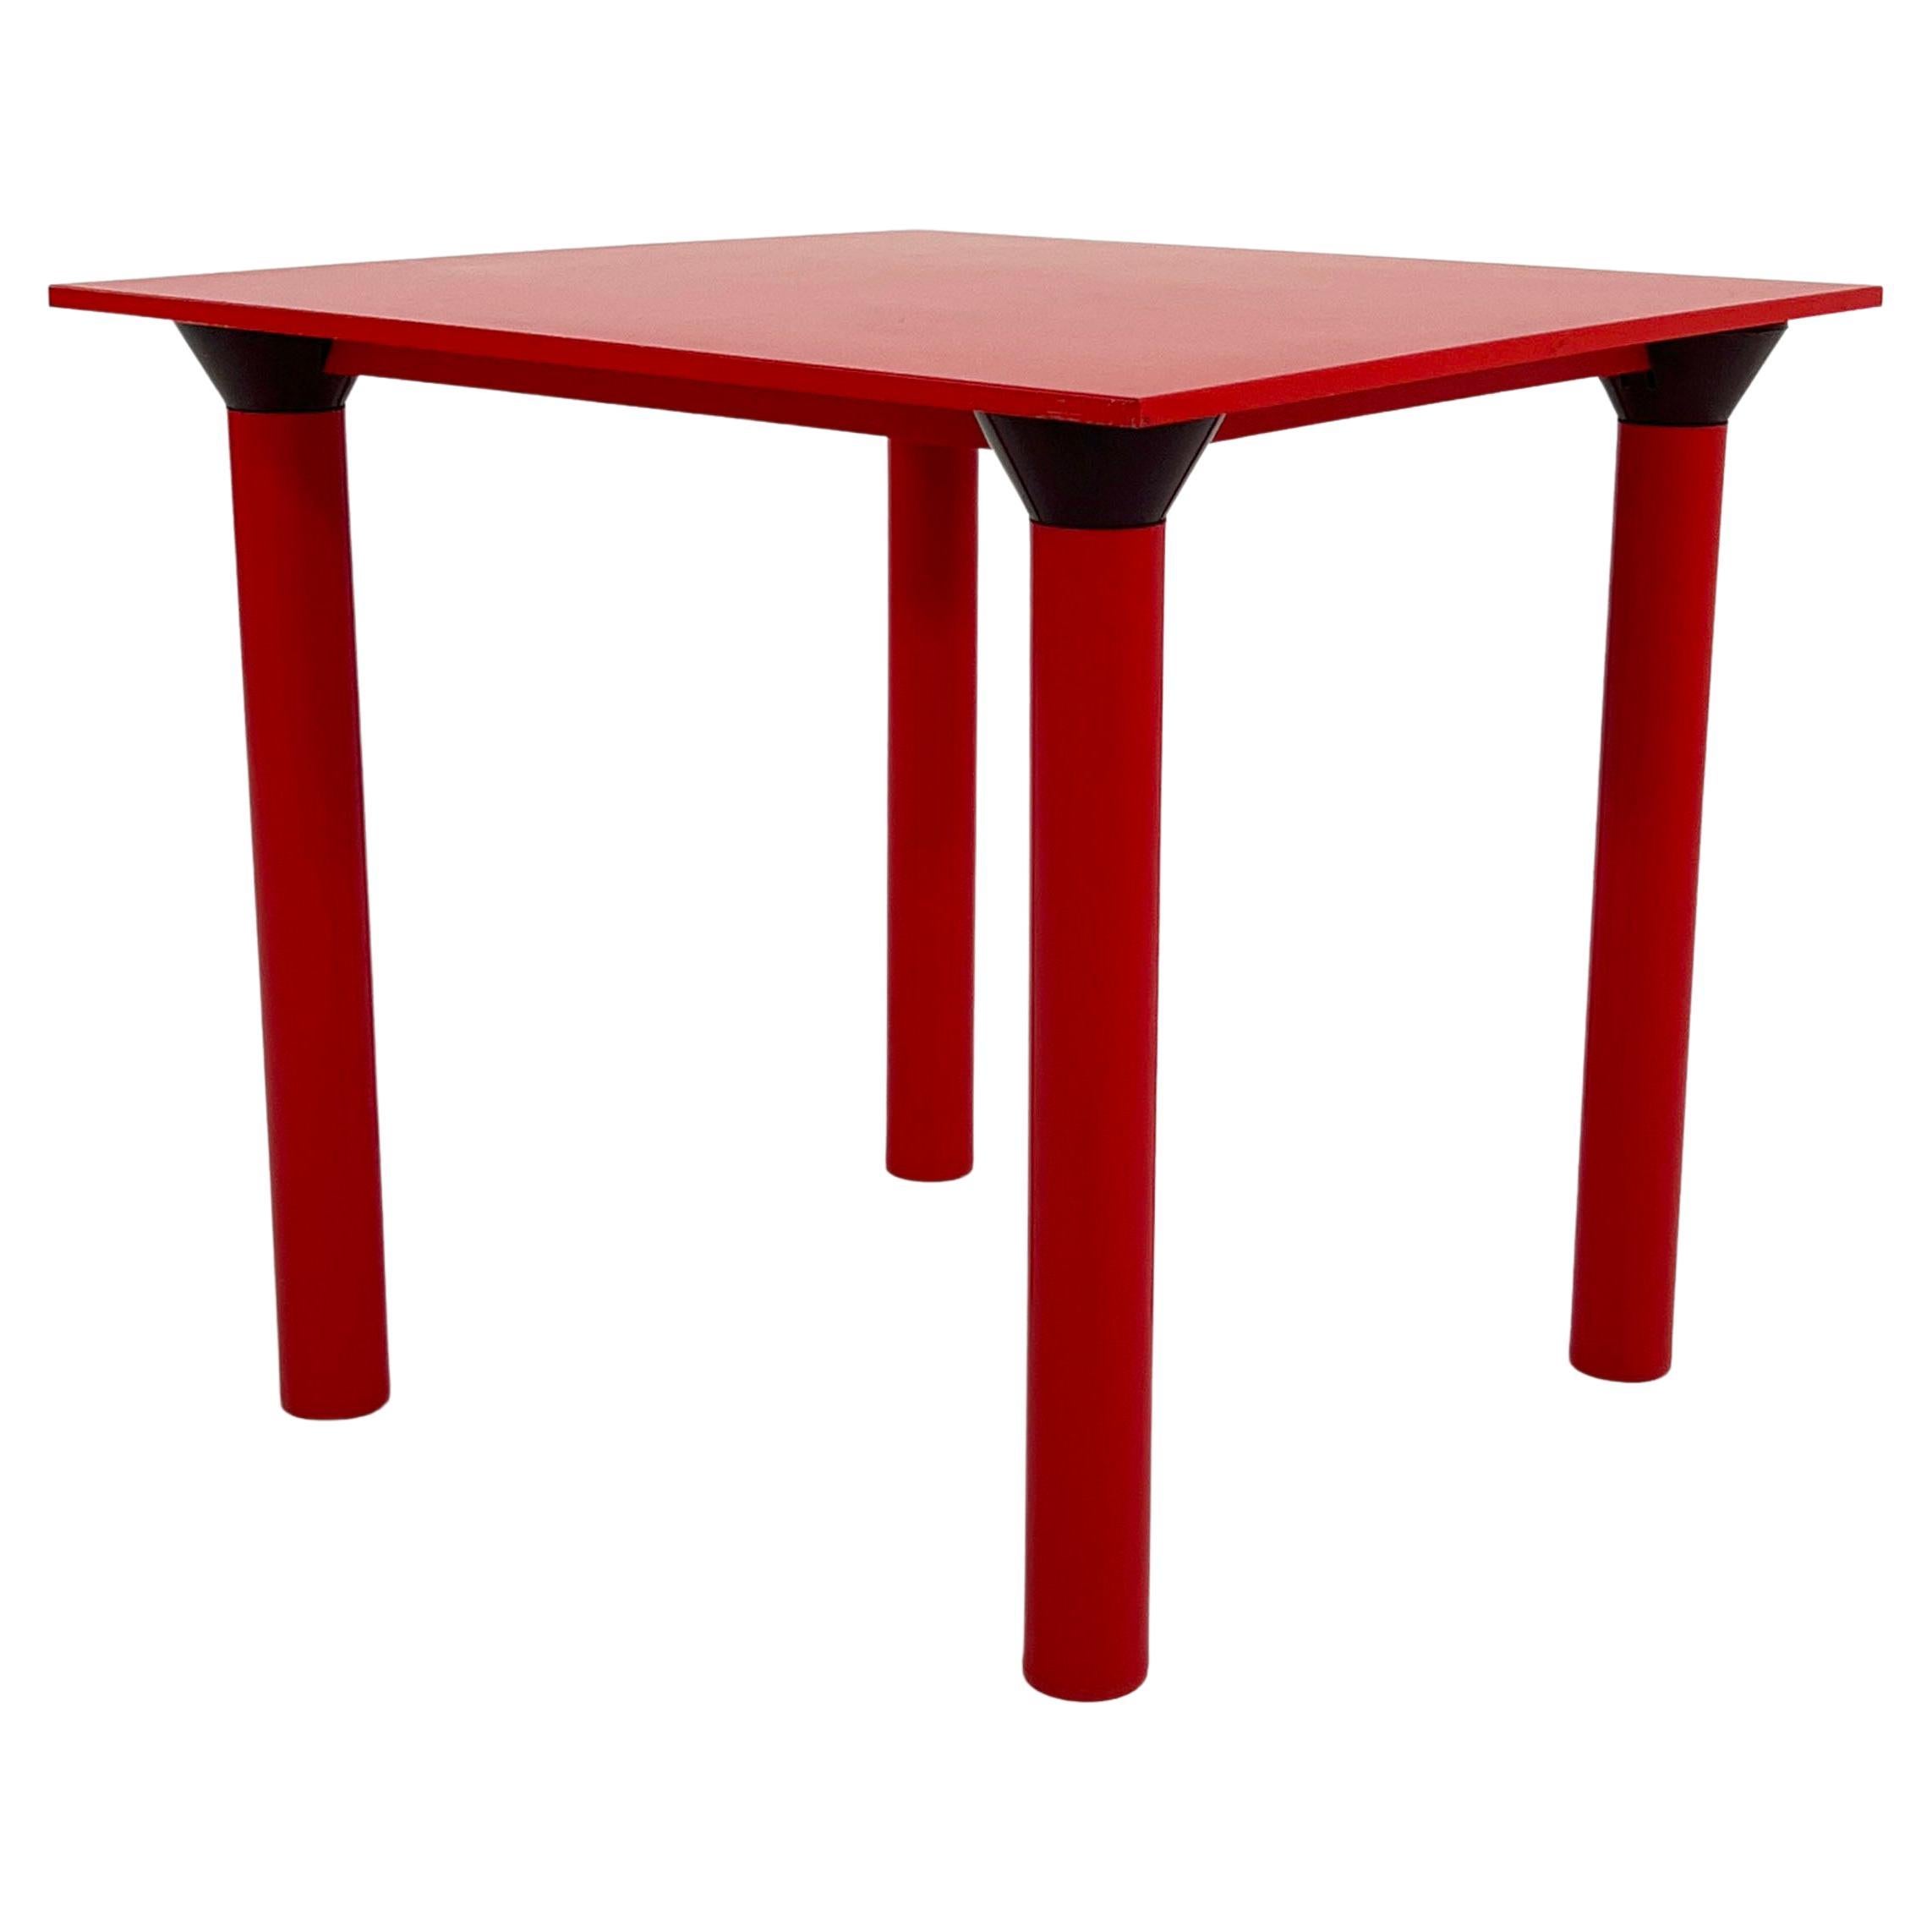 Red Dining Table Model 4300 by Anna Castelli Ferrieri for Kartell, 1970s